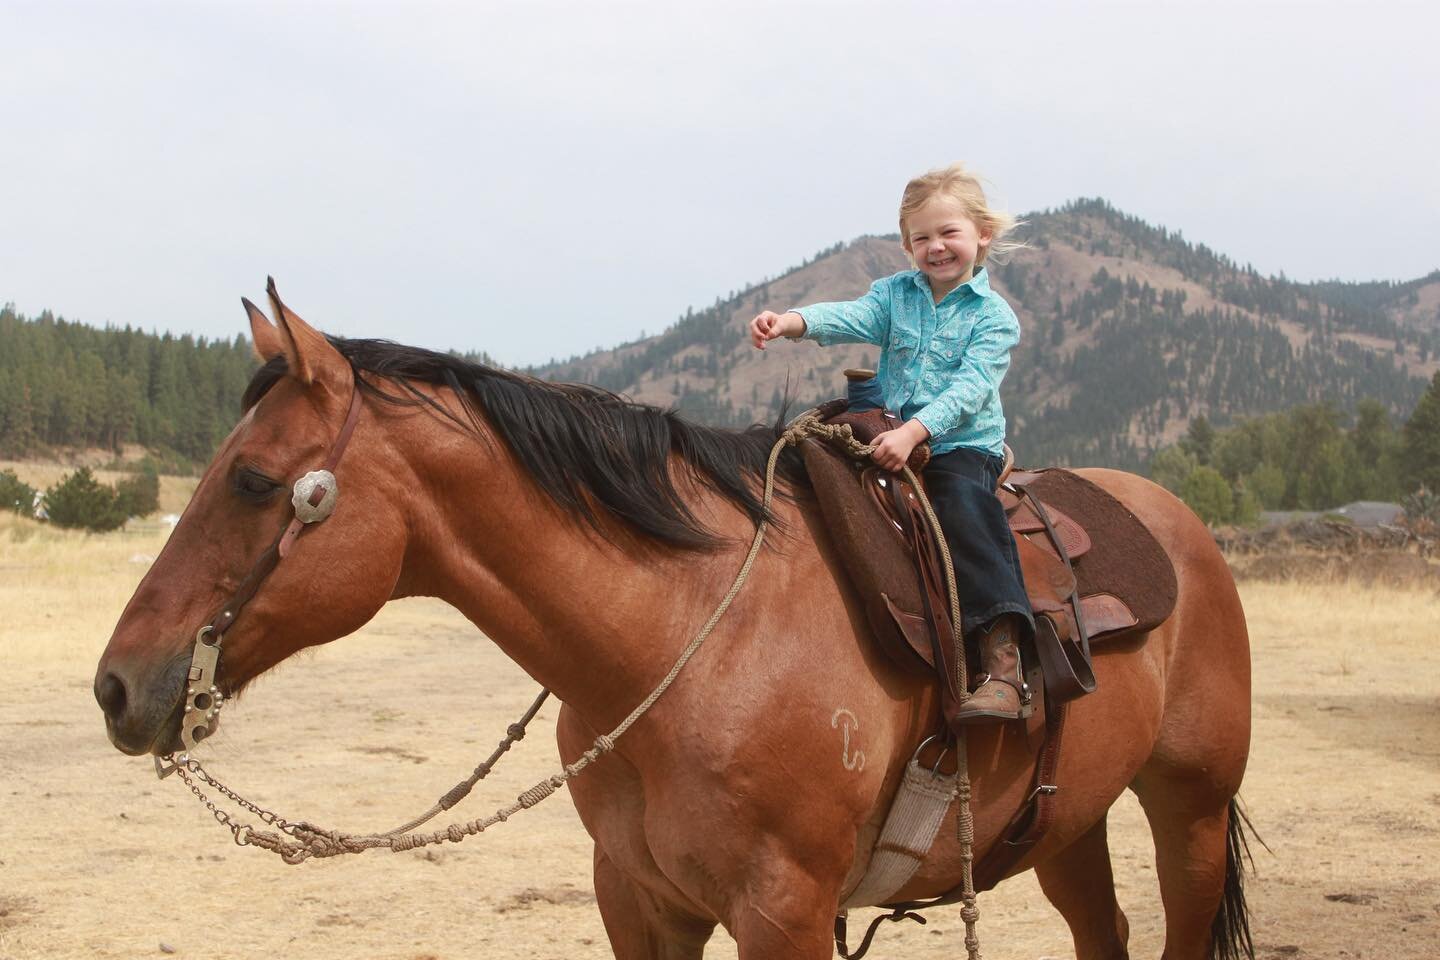 I think I&rsquo;ll always remember this summer as the summer Maggie learned to really ride. Though she rode independently for most of July and August last summer, she was reluctant and clumsy, quick to pull her horse &ldquo;Big Jake&rdquo; back from 